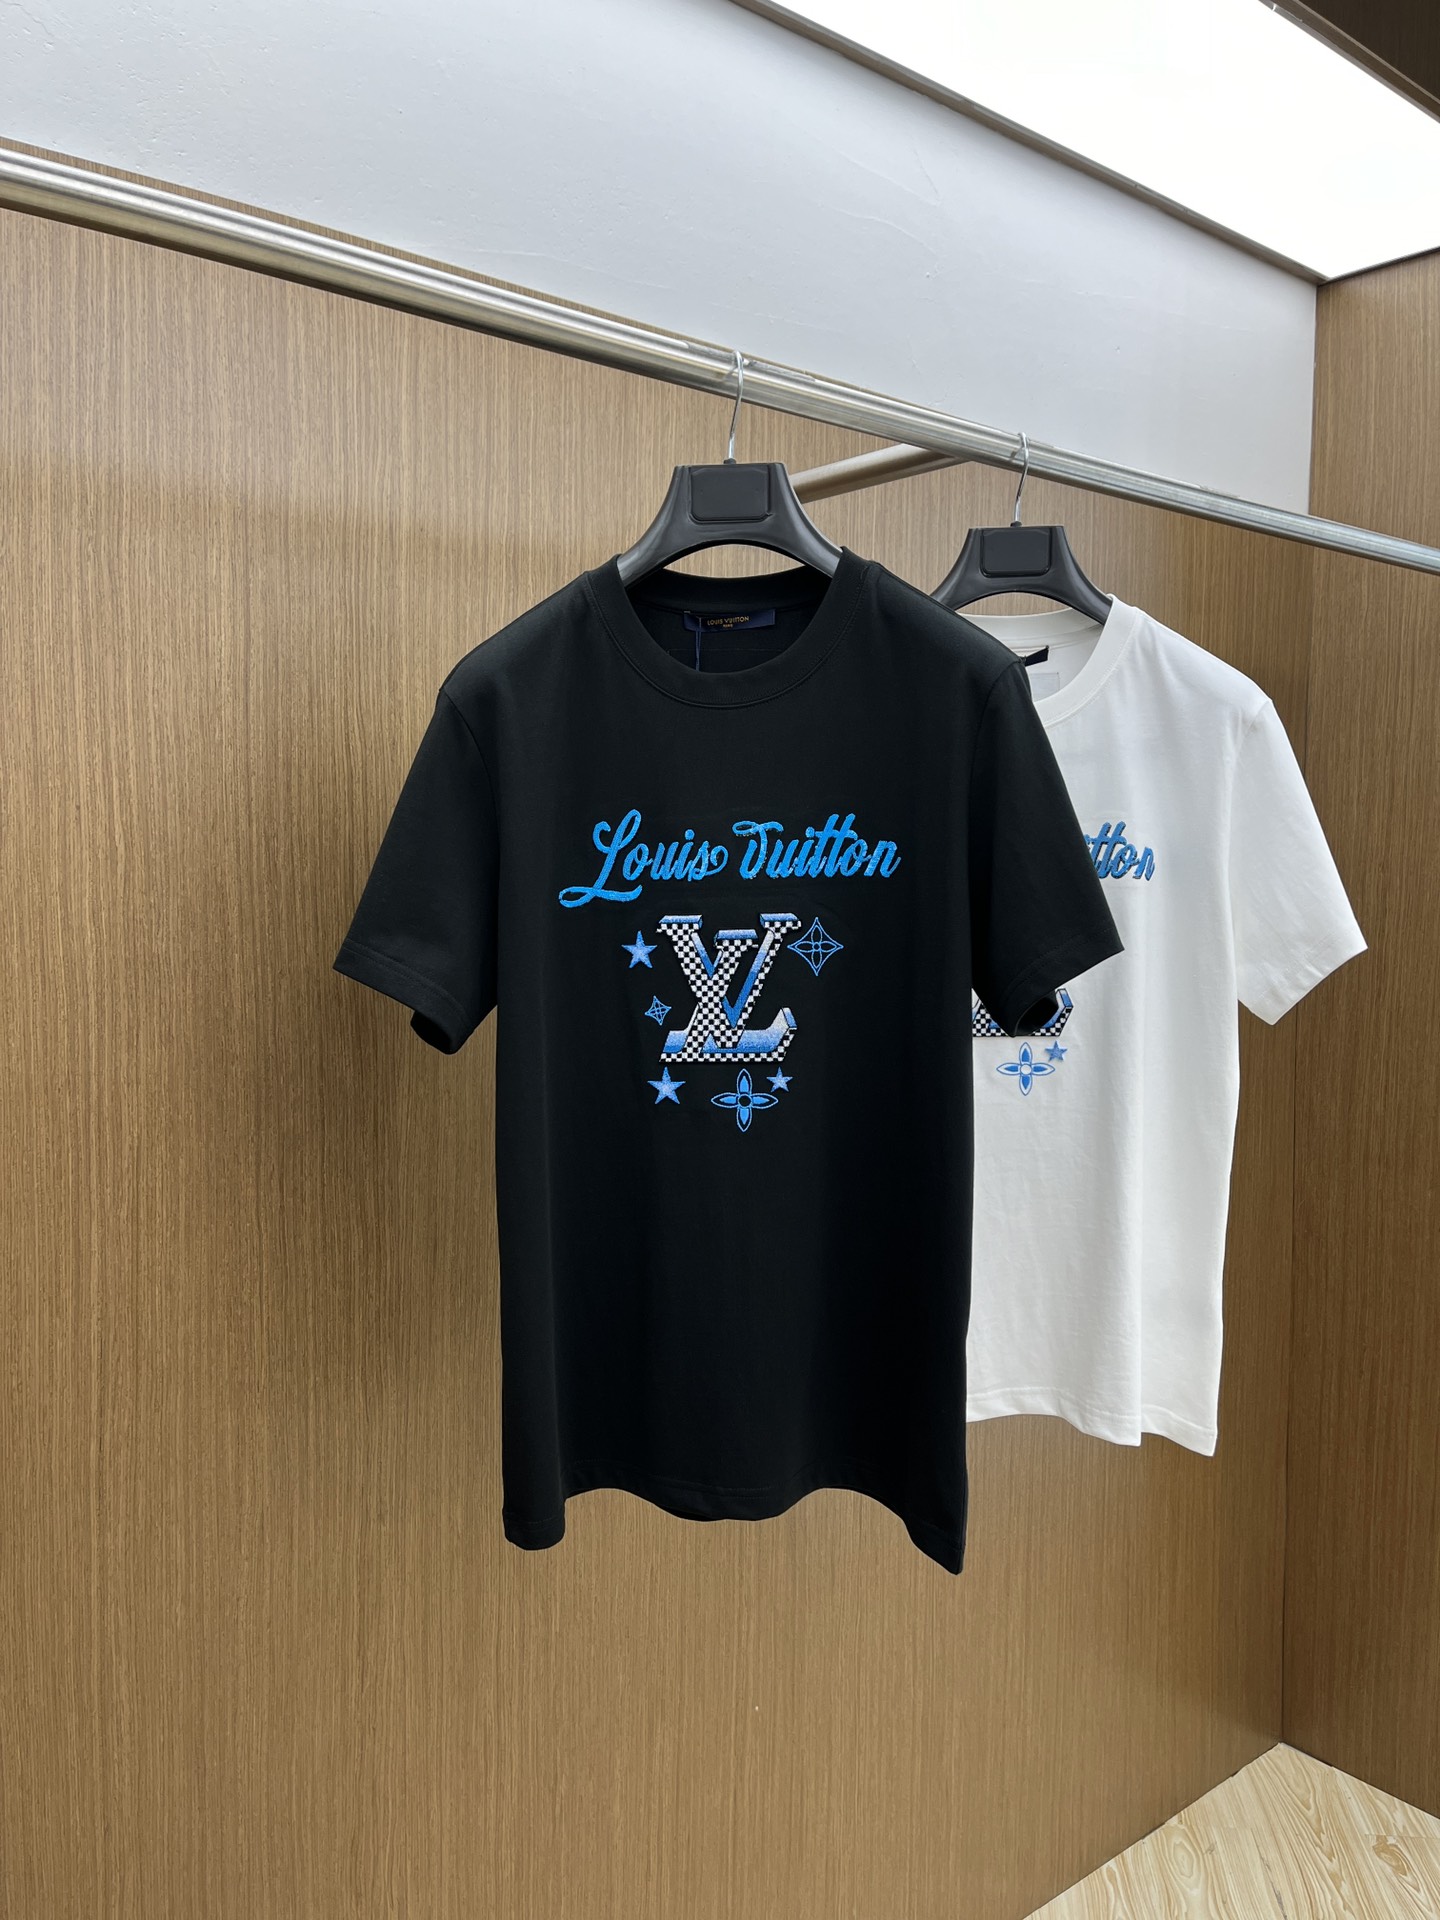 Louis Vuitton Clothing T-Shirt Spring/Summer Collection Fashion Short Sleeve